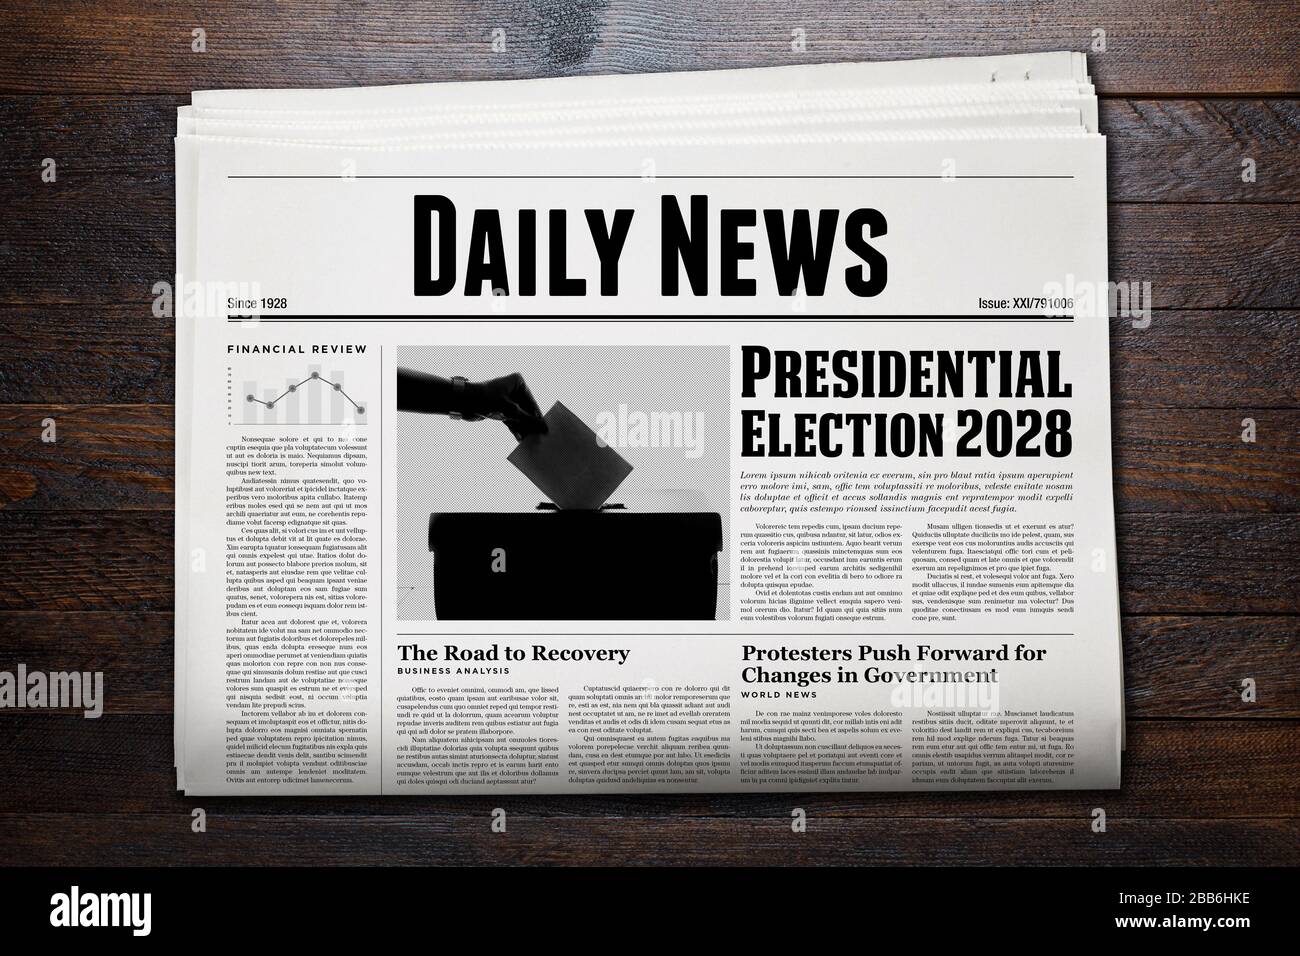 Presidential election 2028 news on daily newspaper. Stock Photo